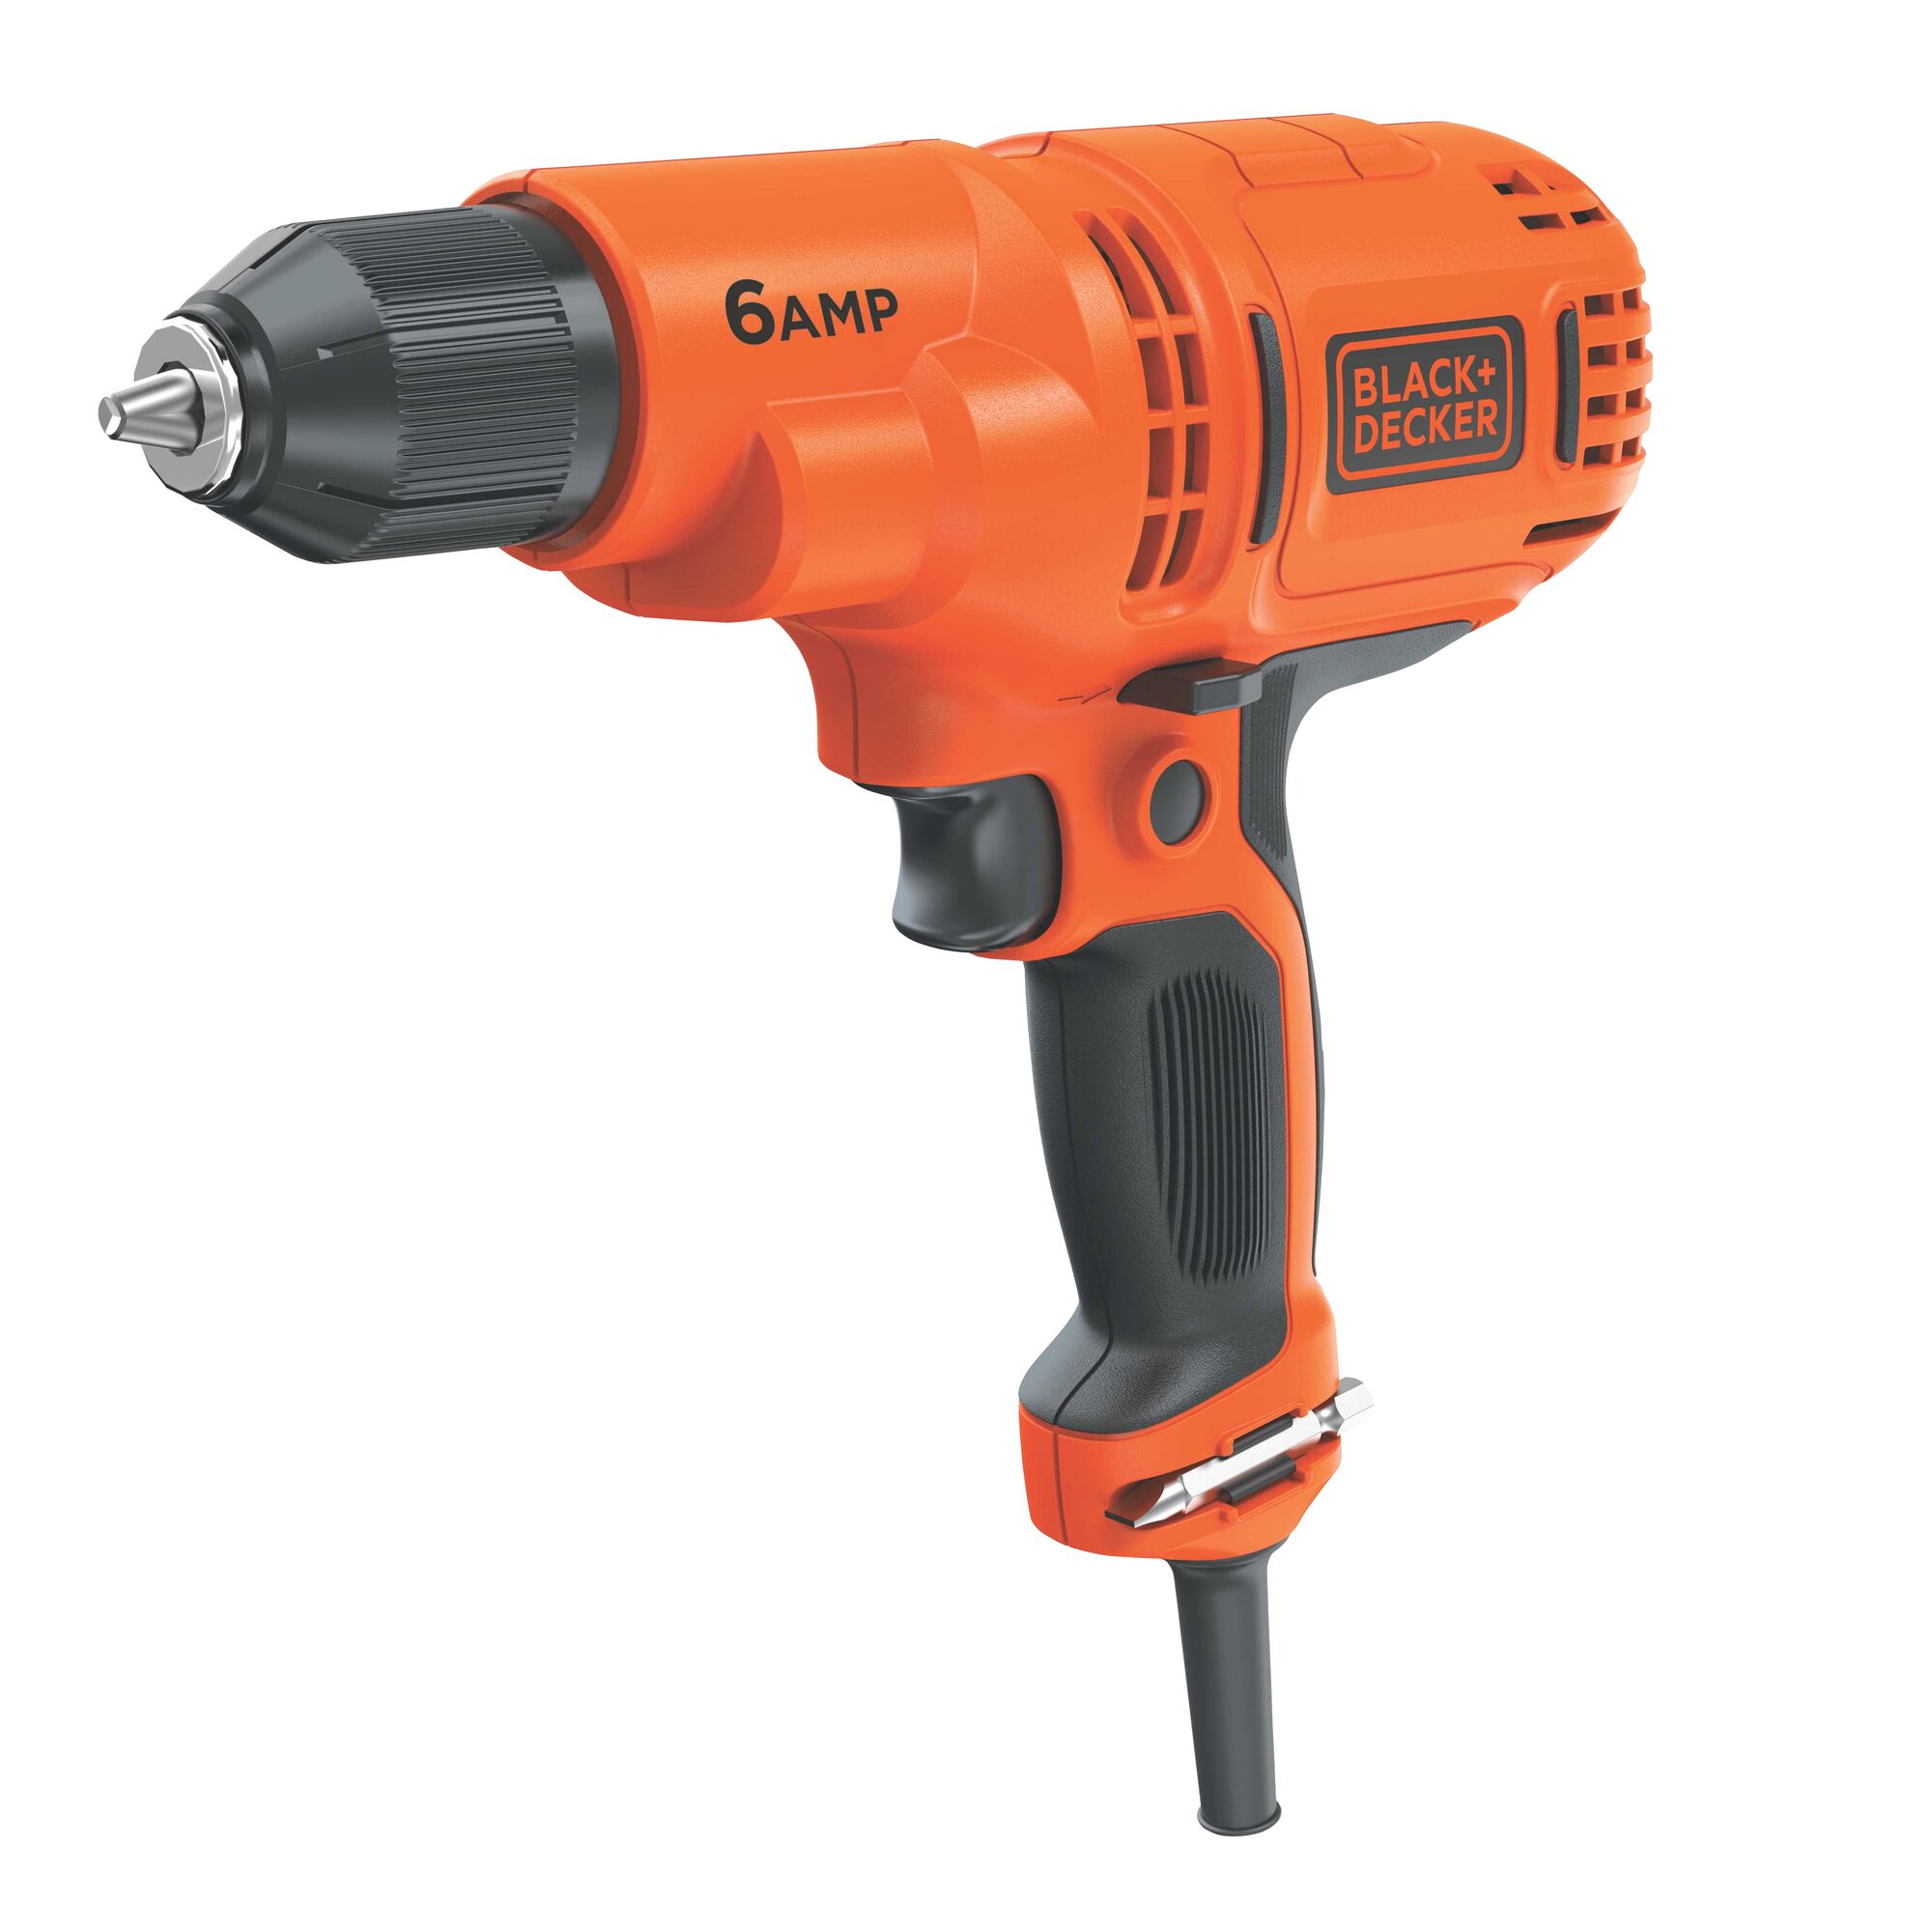 Profile of black and decker 6 amp 3 eighths inch drill driver.